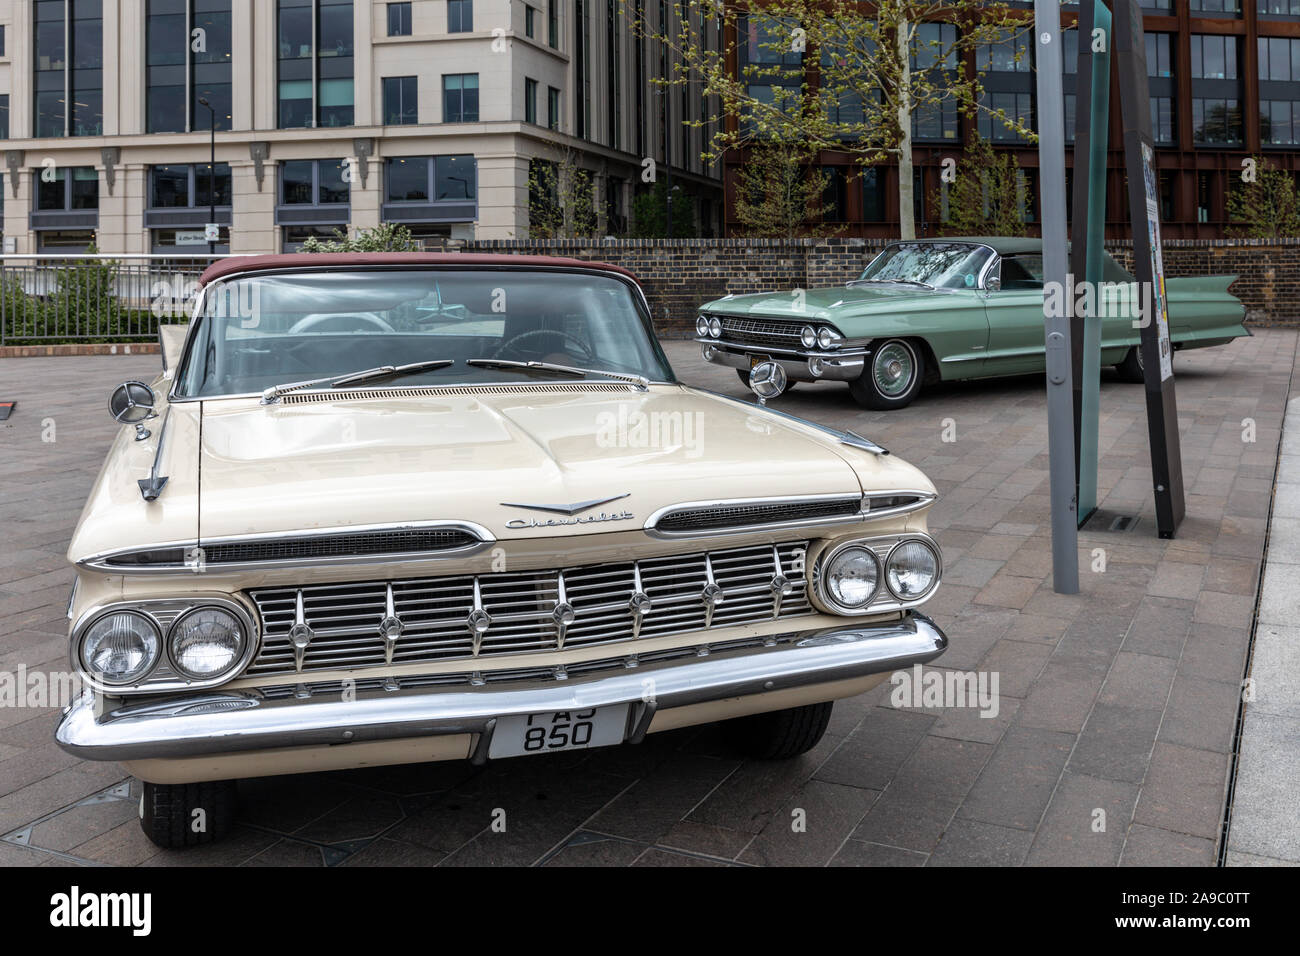 Two vintage American cars, a Chevrolet Impala and and Cadillac Eldorado, London Classic Car Boot Sale, King's Cross, London, UK Stock Photo